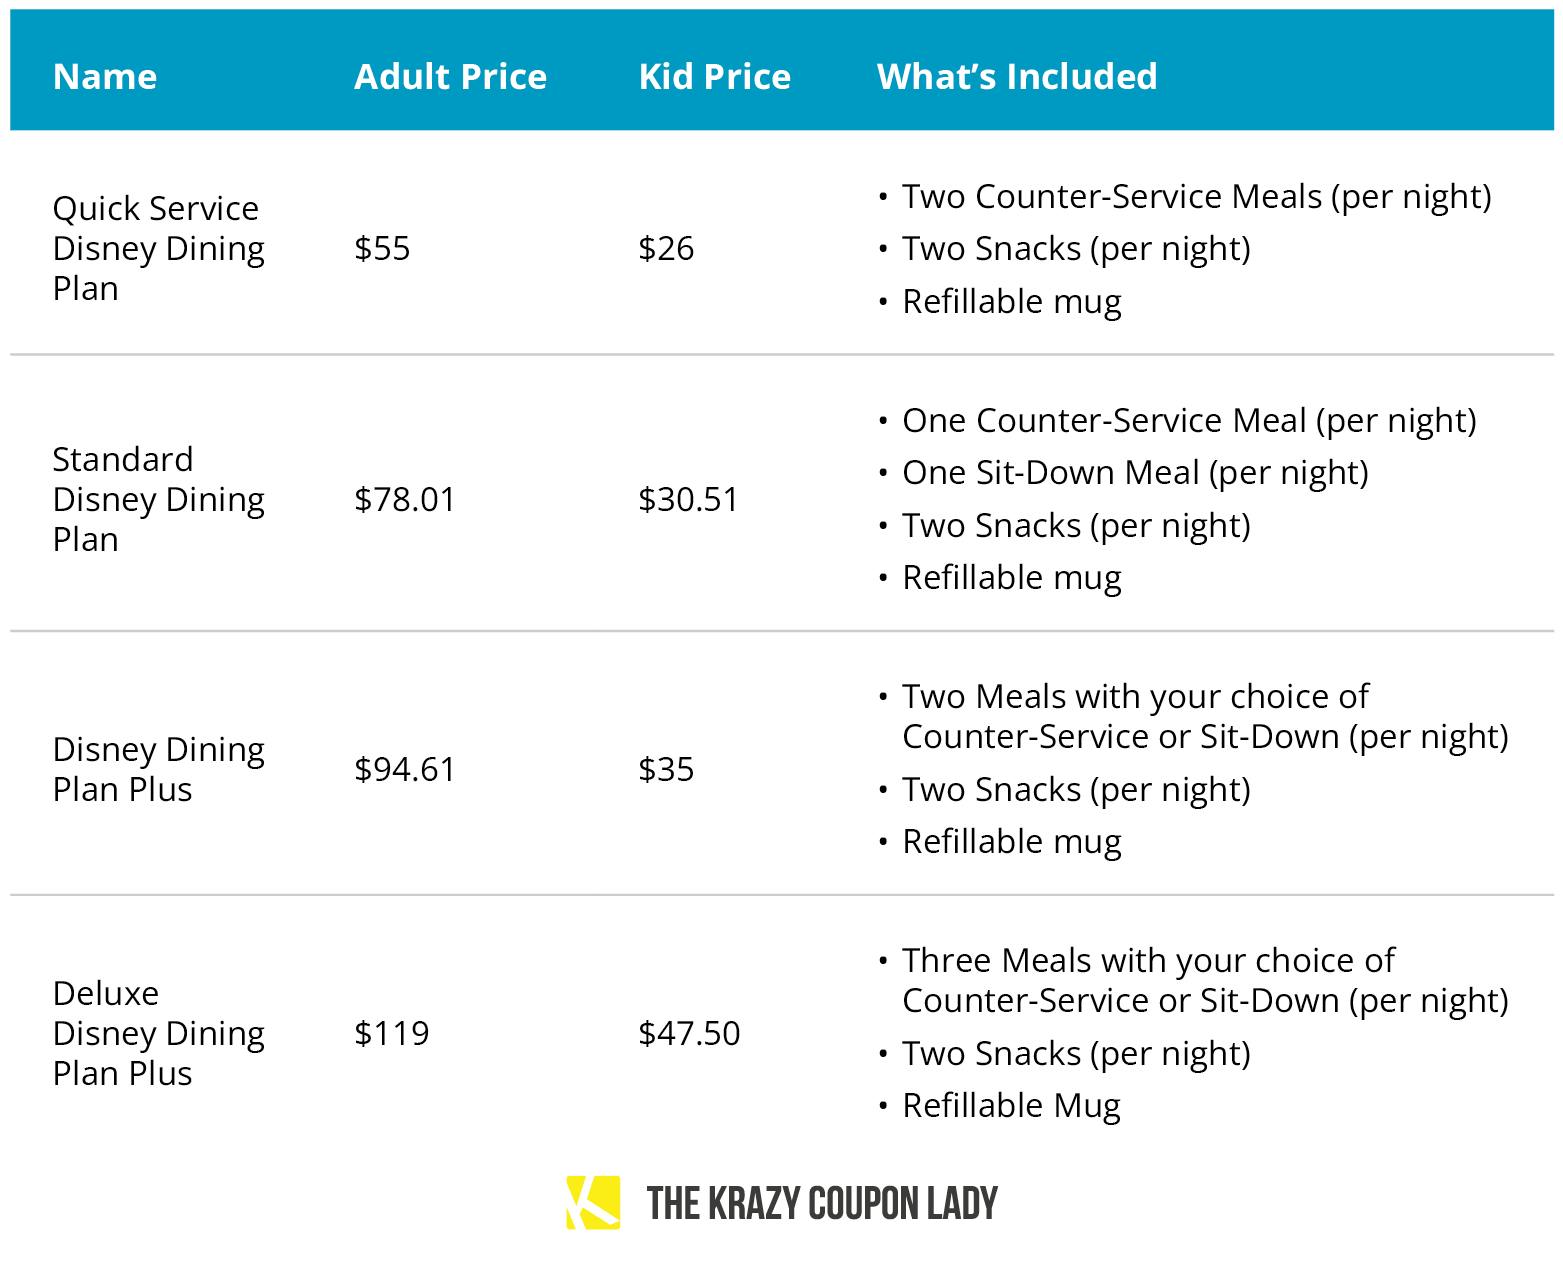 A table outlining the types of Disney Dining Plans, their prices, and what is included. 1. Quick Service Disney Dining Plan, Adult Price $55, Kid Price $26, Includes: Two counter-service meals (per night), two snacks (per night), and a refillable mug. 2. Standard Disney Dining Plan, Adult Price $78.01, Kid Price $30.51, Includes One counter-service meal (per night), one sit-down meal (per night), two snacks (per night), and a refillable mug. 3. Disney Dining Plan Plus, Adult Price $94.61, Kid Price $35, Includes two meals with your choice of counter-service or sit-down (per night), two snacks (per night), and a refillable mug. 4. Deluxe Disney Dining Plan Plus, Adult Price $119, Kid Price $47.50, Includes three meals with your choice of counter-service or sit-down (per night), two snacks (per night), and a refillable mug.